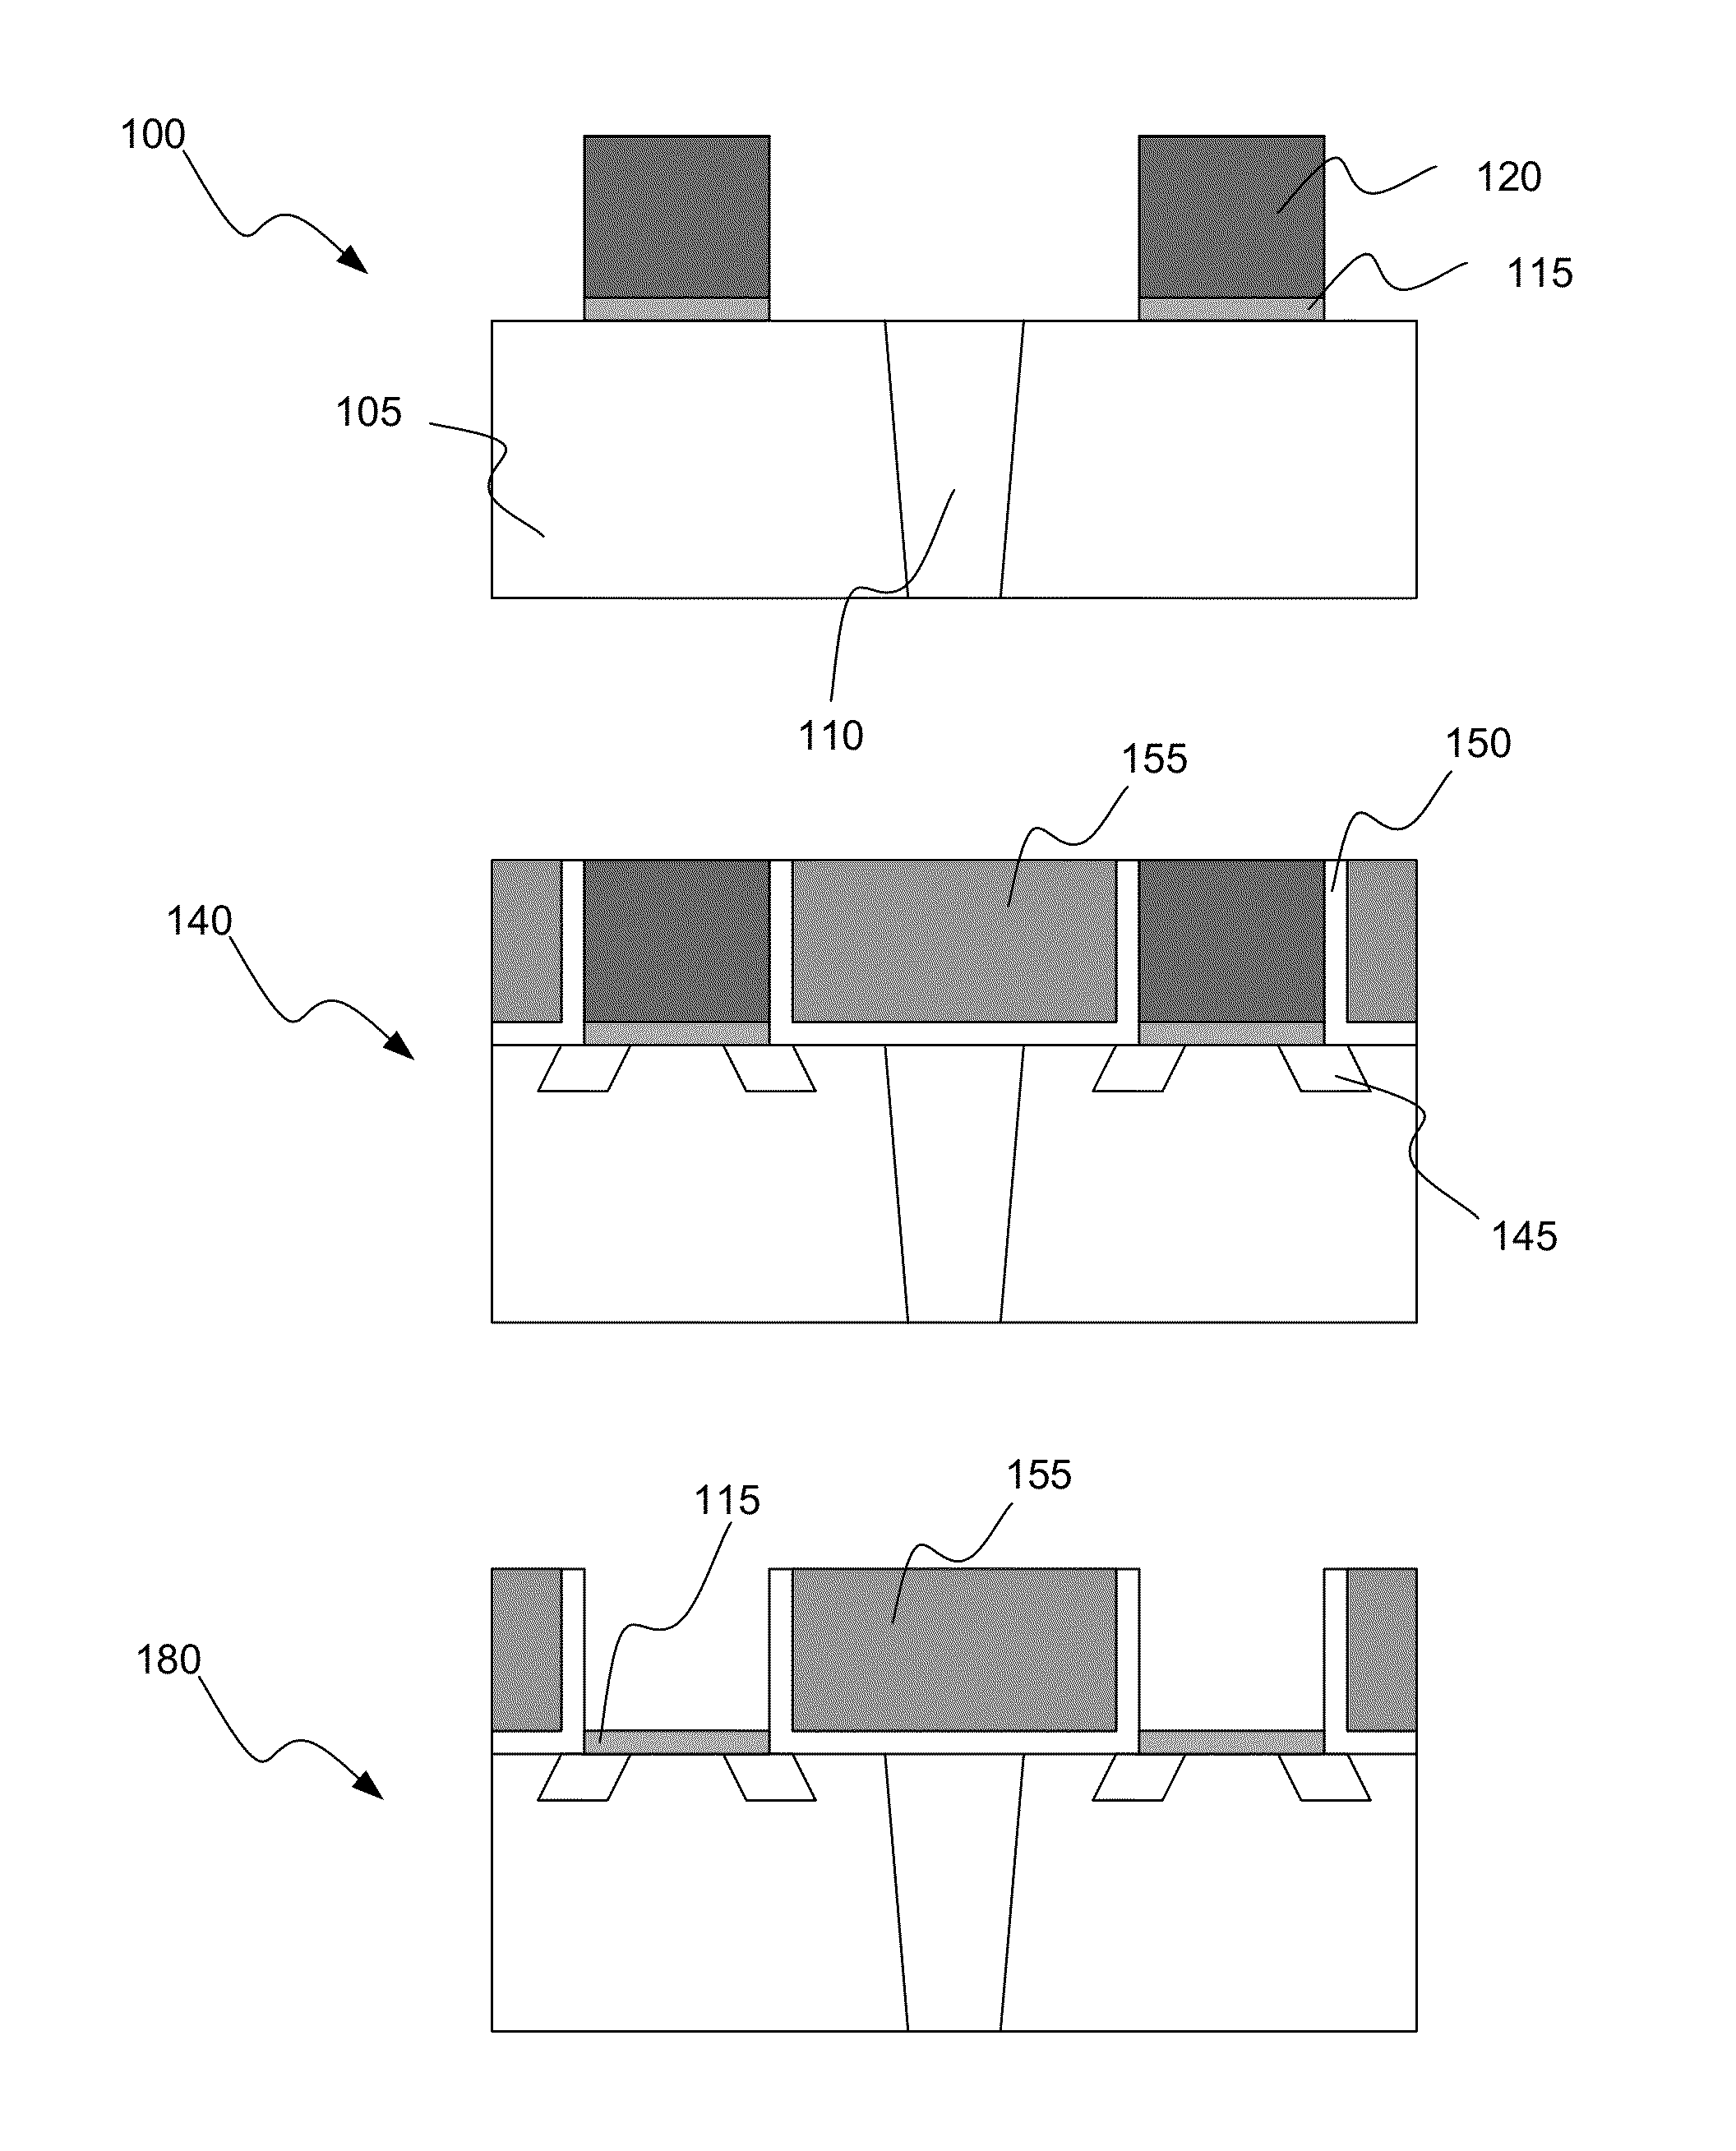 Insensitive dry removal process for semiconductor integration